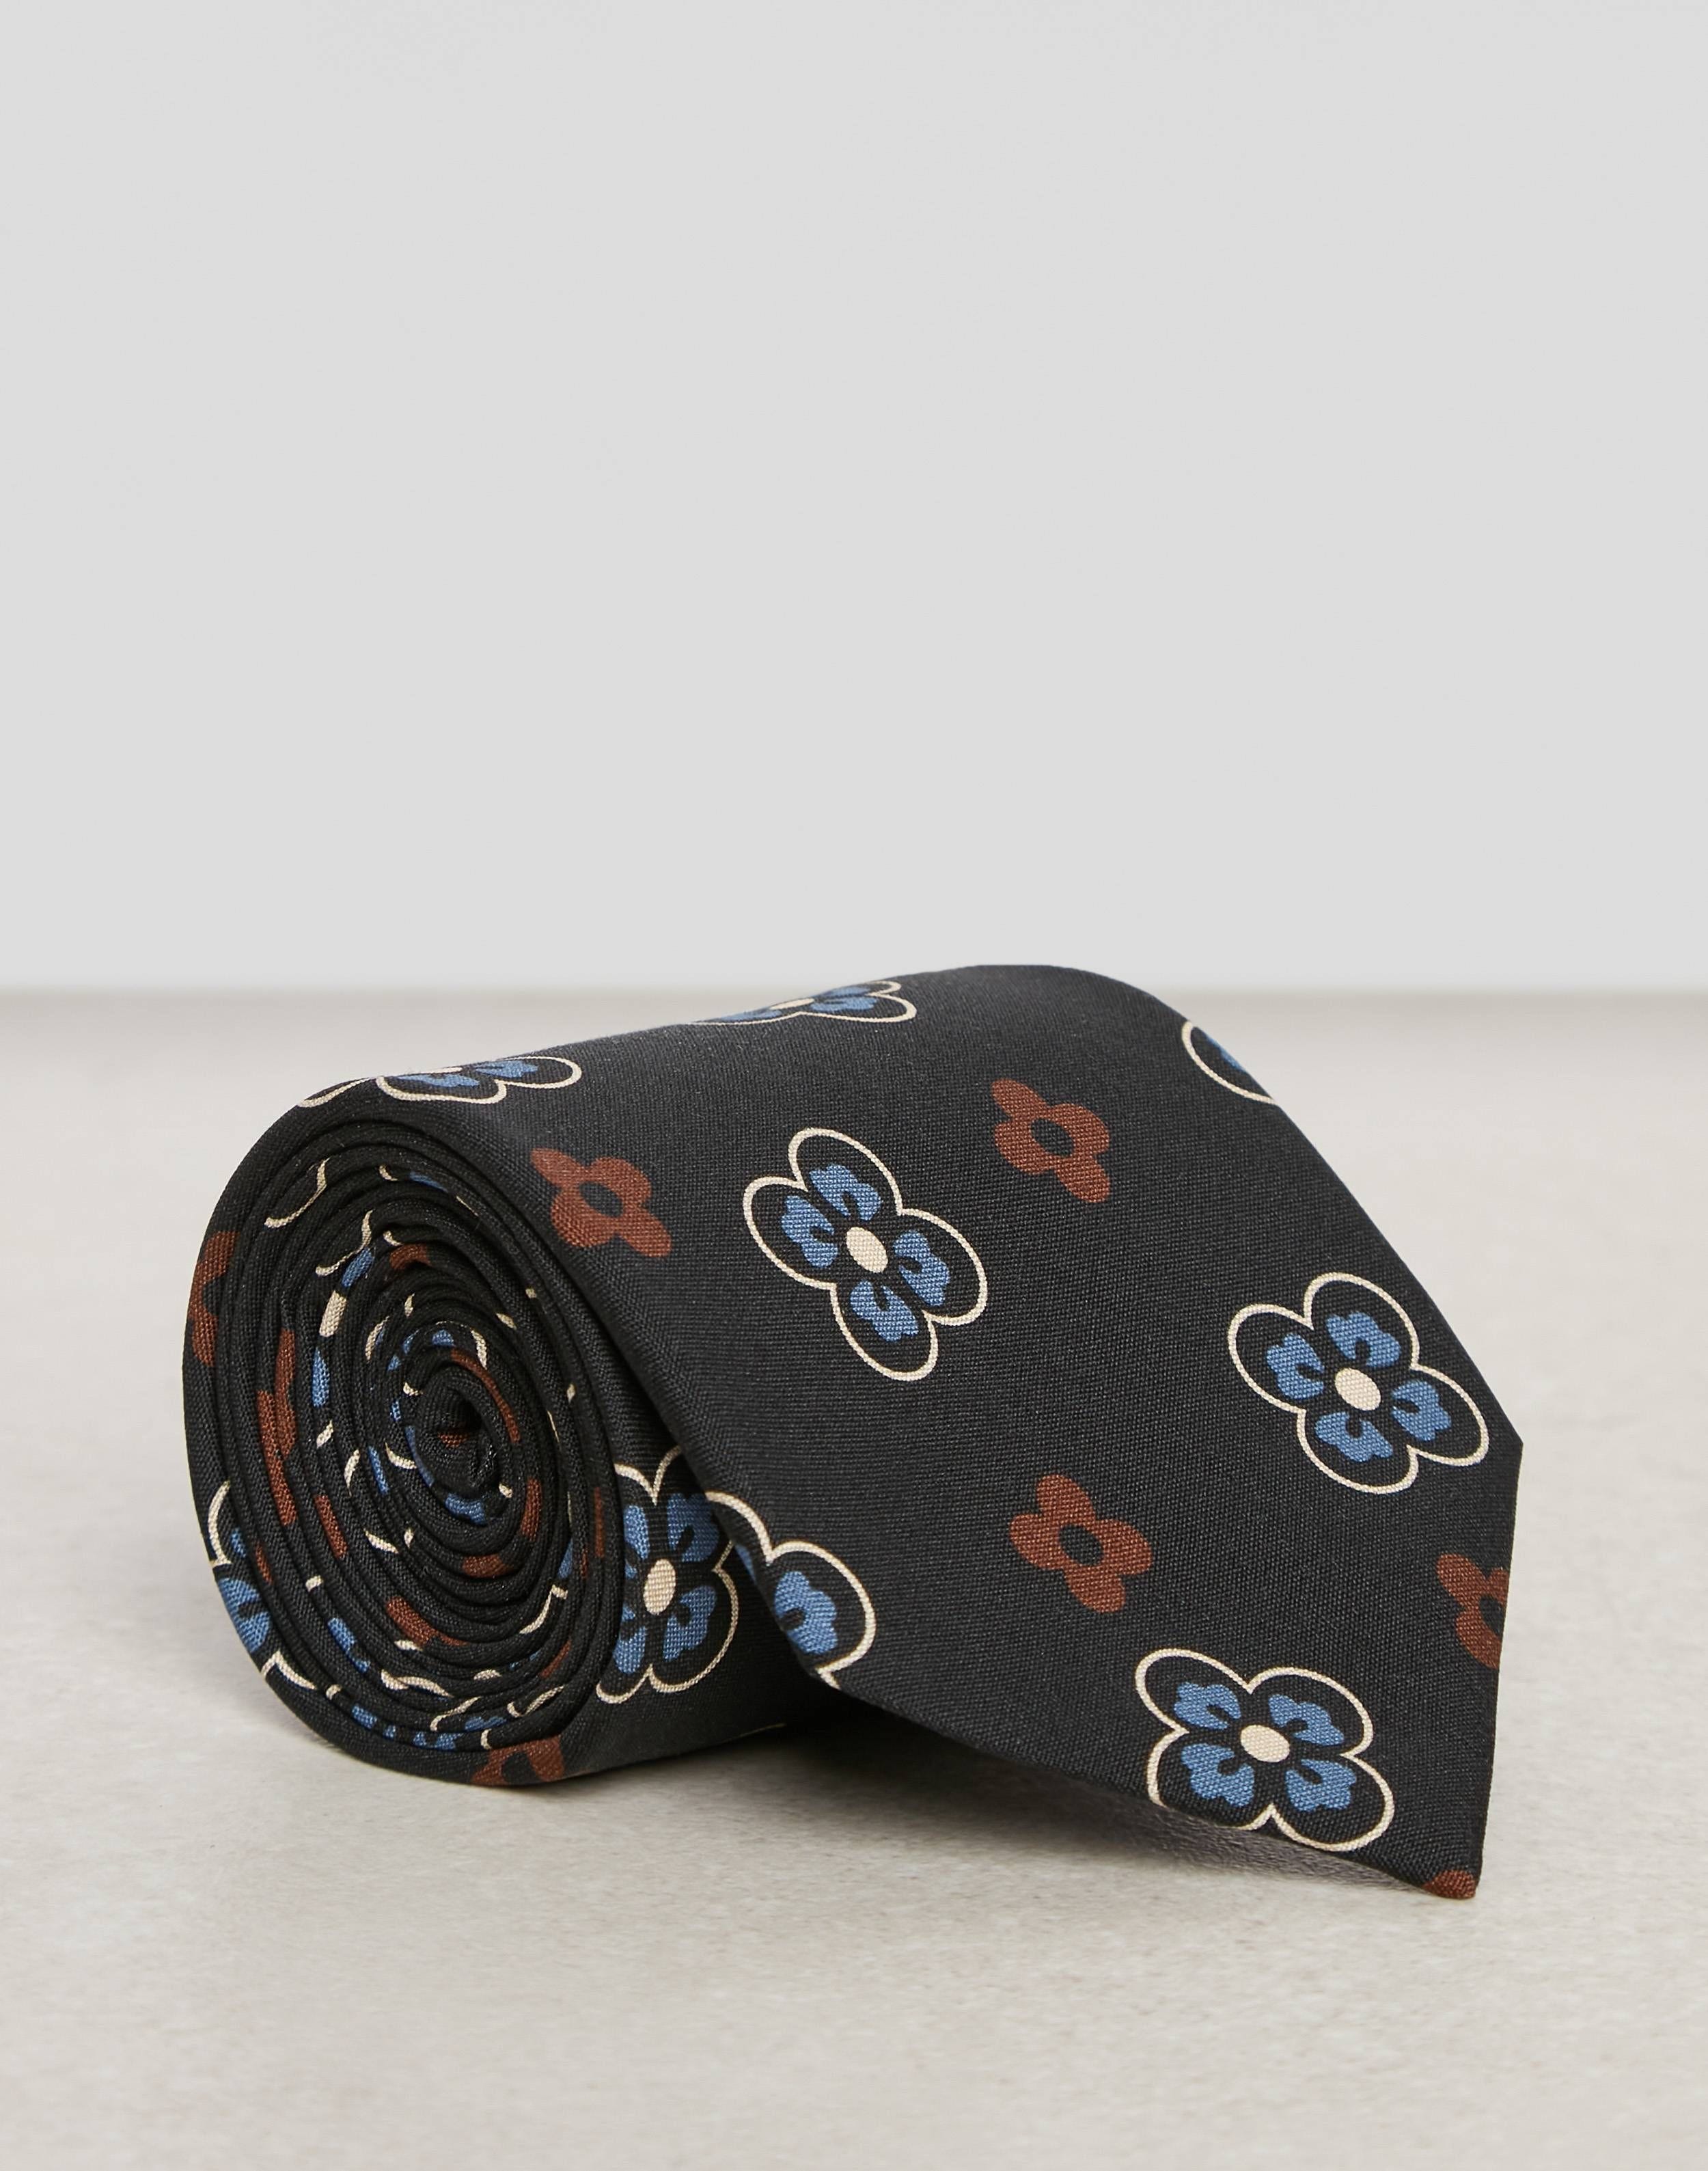 Wool-and-silk tie with floral pattern